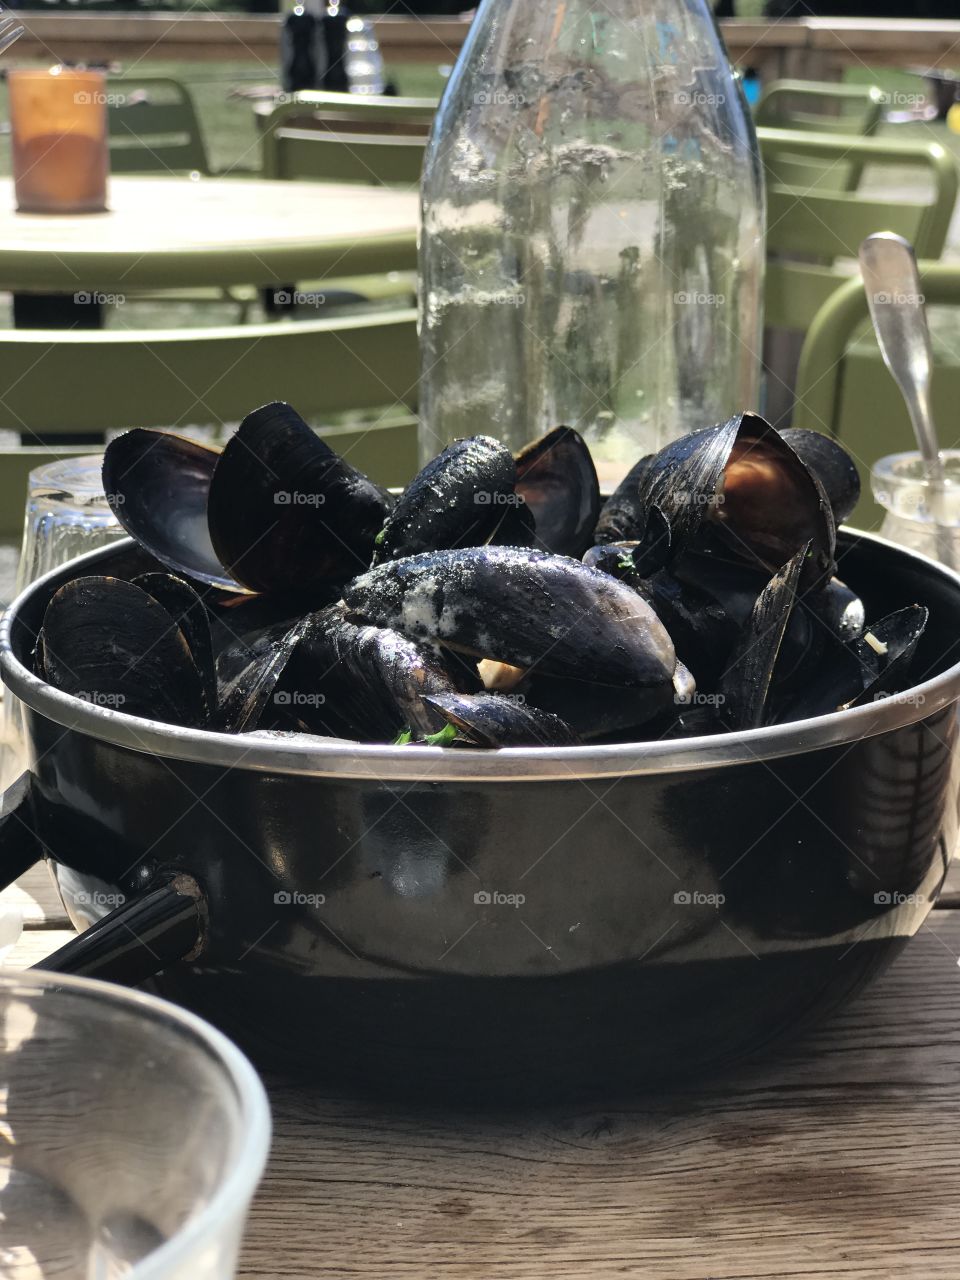 Eating mussels 